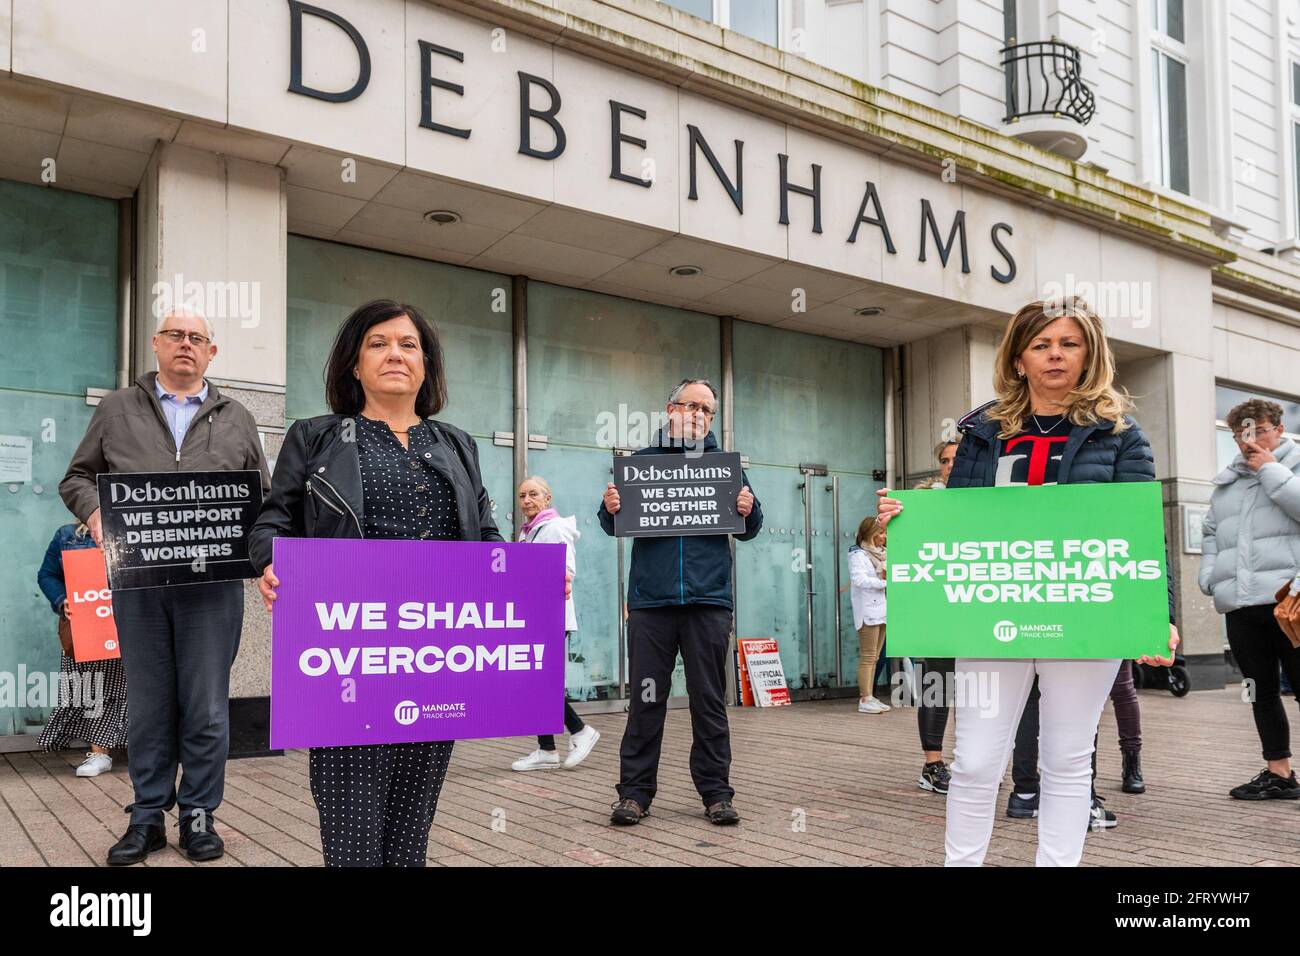 Cork, Ireland. 21st May, 2021. After 406 days outside Debenhams Patrick Street, Cork store, ex-workers have called off their protest. The ex-Debenhams staff were protesting to receive their full redundancy entitlement, but were offered a €3m 'upskilling' package, which they accepted with a majority vote yesterday. Pictured are Thomas Gould TD (SF); Valerie Conlon, ex-Debenhams shop steward; Mick Barry TD (Irish Solidarity-People Before Profit) and protester Madeline Whelan. Credit: AG News/Alamy Live News Stock Photo